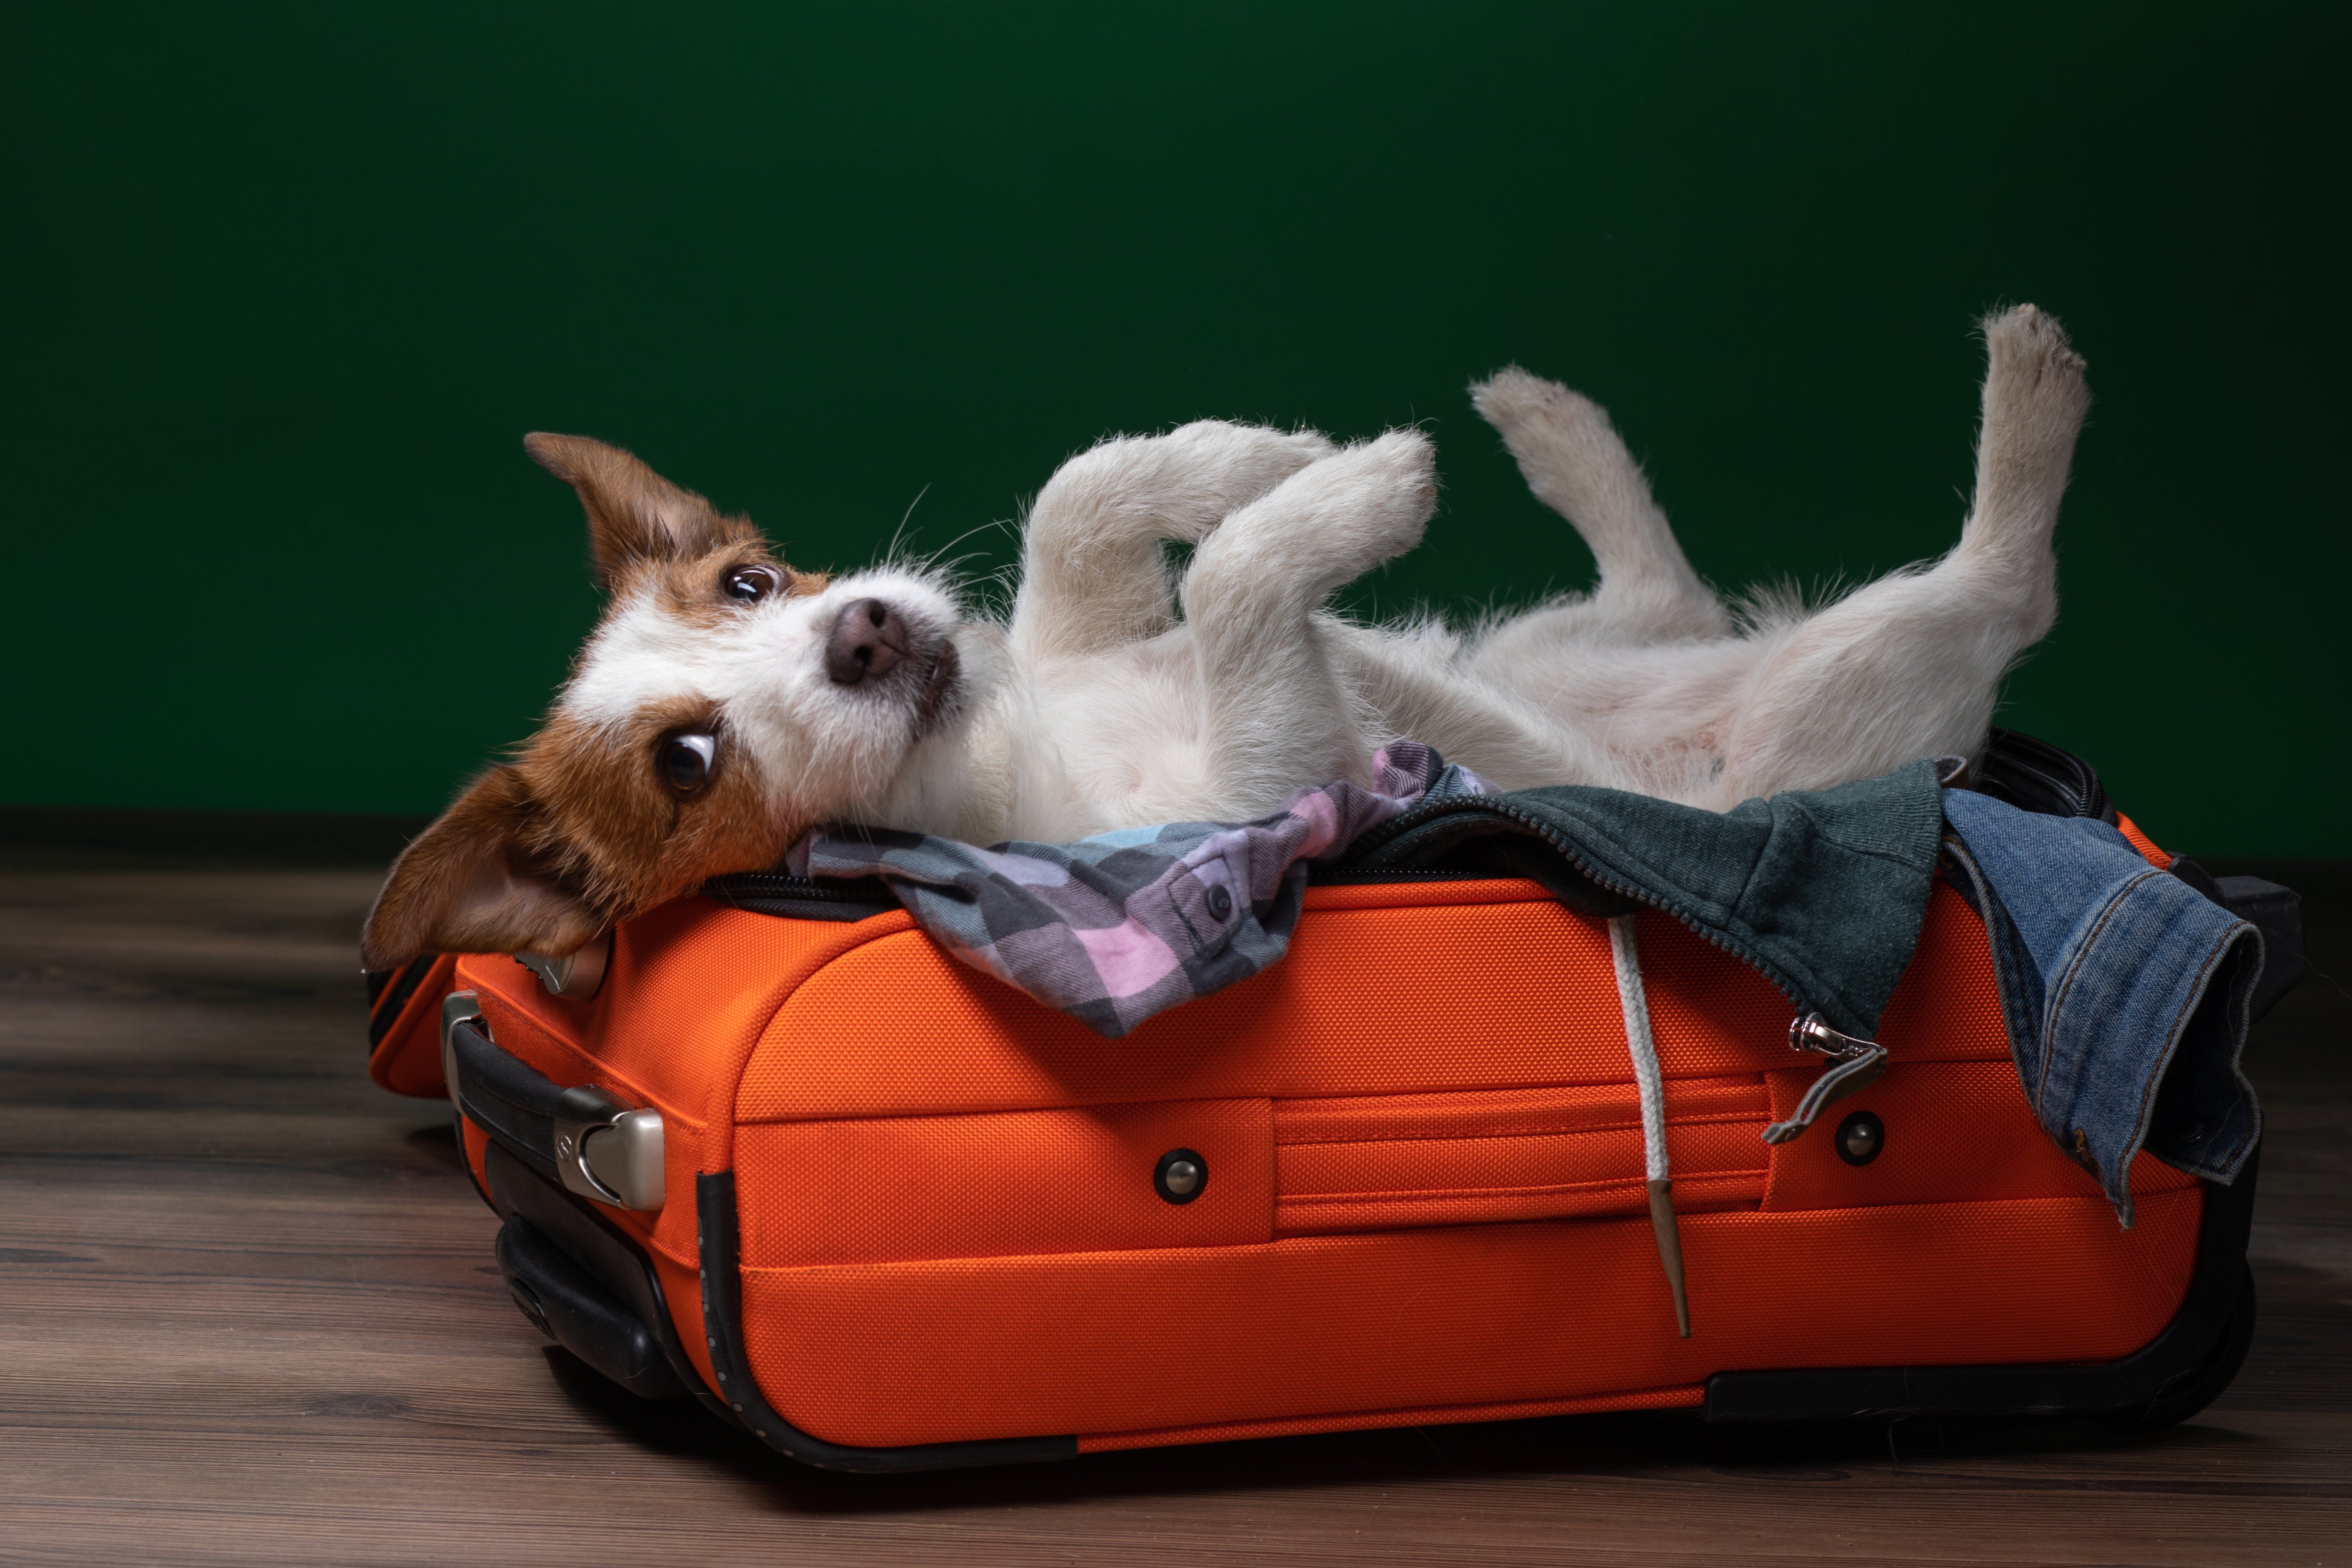 What Should I Bring for My Dog When Boarding?